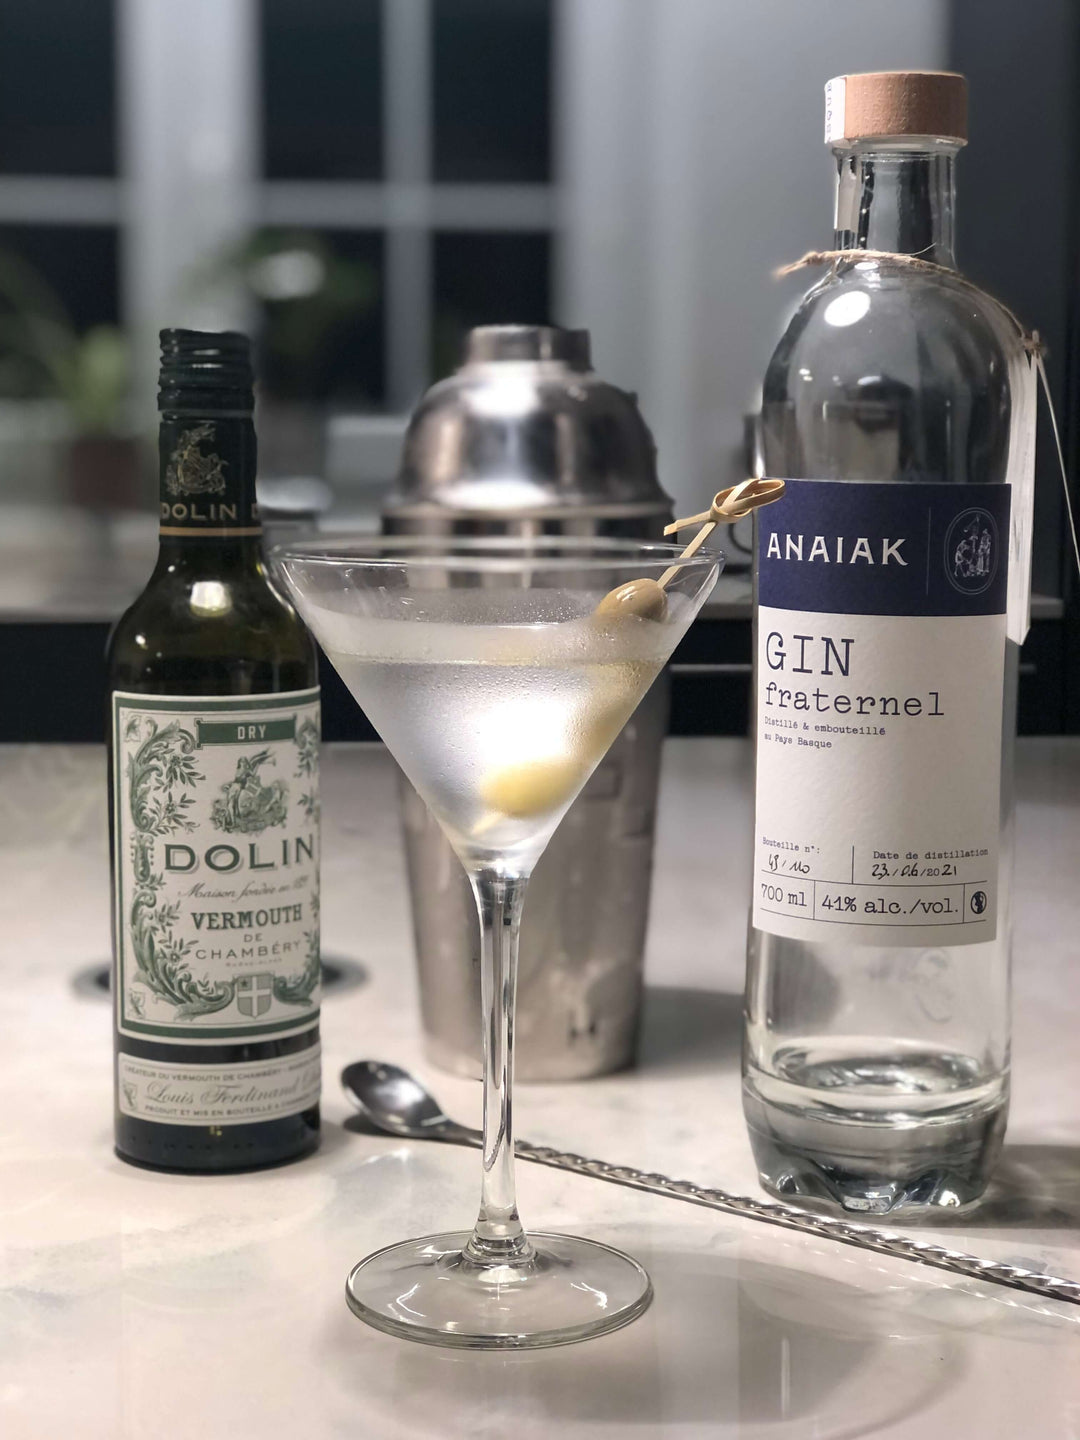 10 Facts about the Martini you probably did not know - GINSATIONS